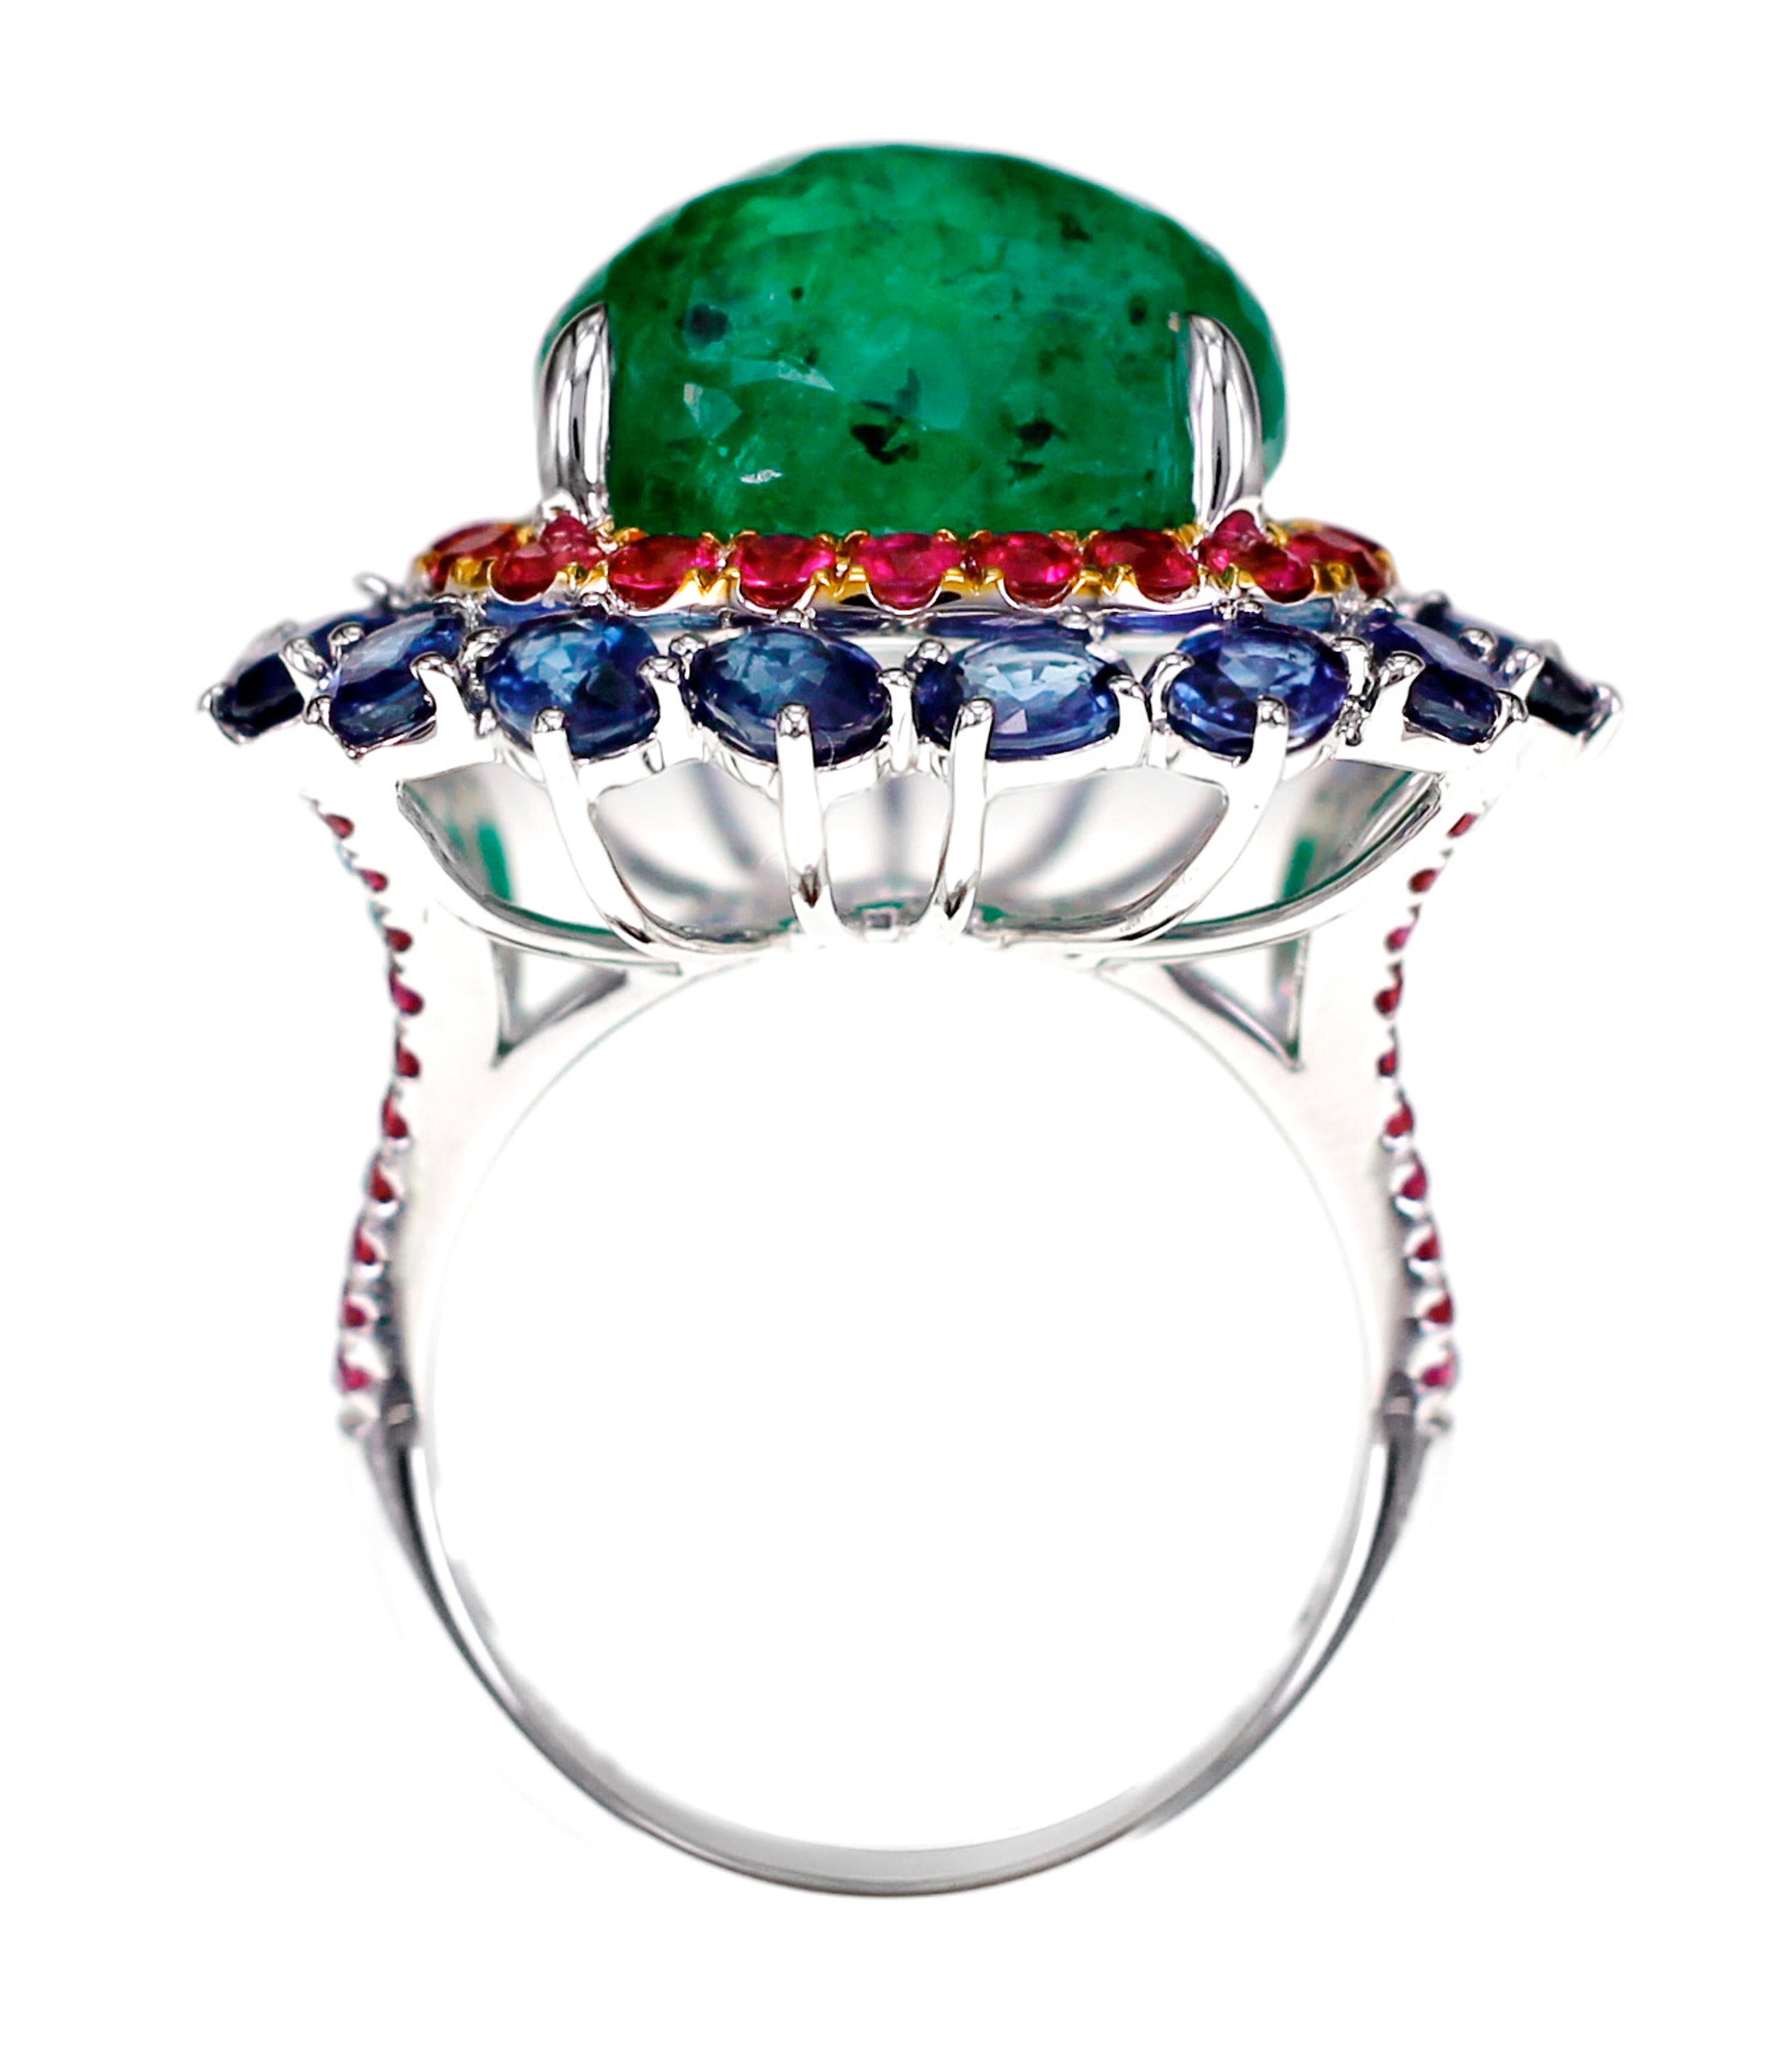 Women's 10.65 Carat Emerald Set with Ruby and Sapphire Antique Ring